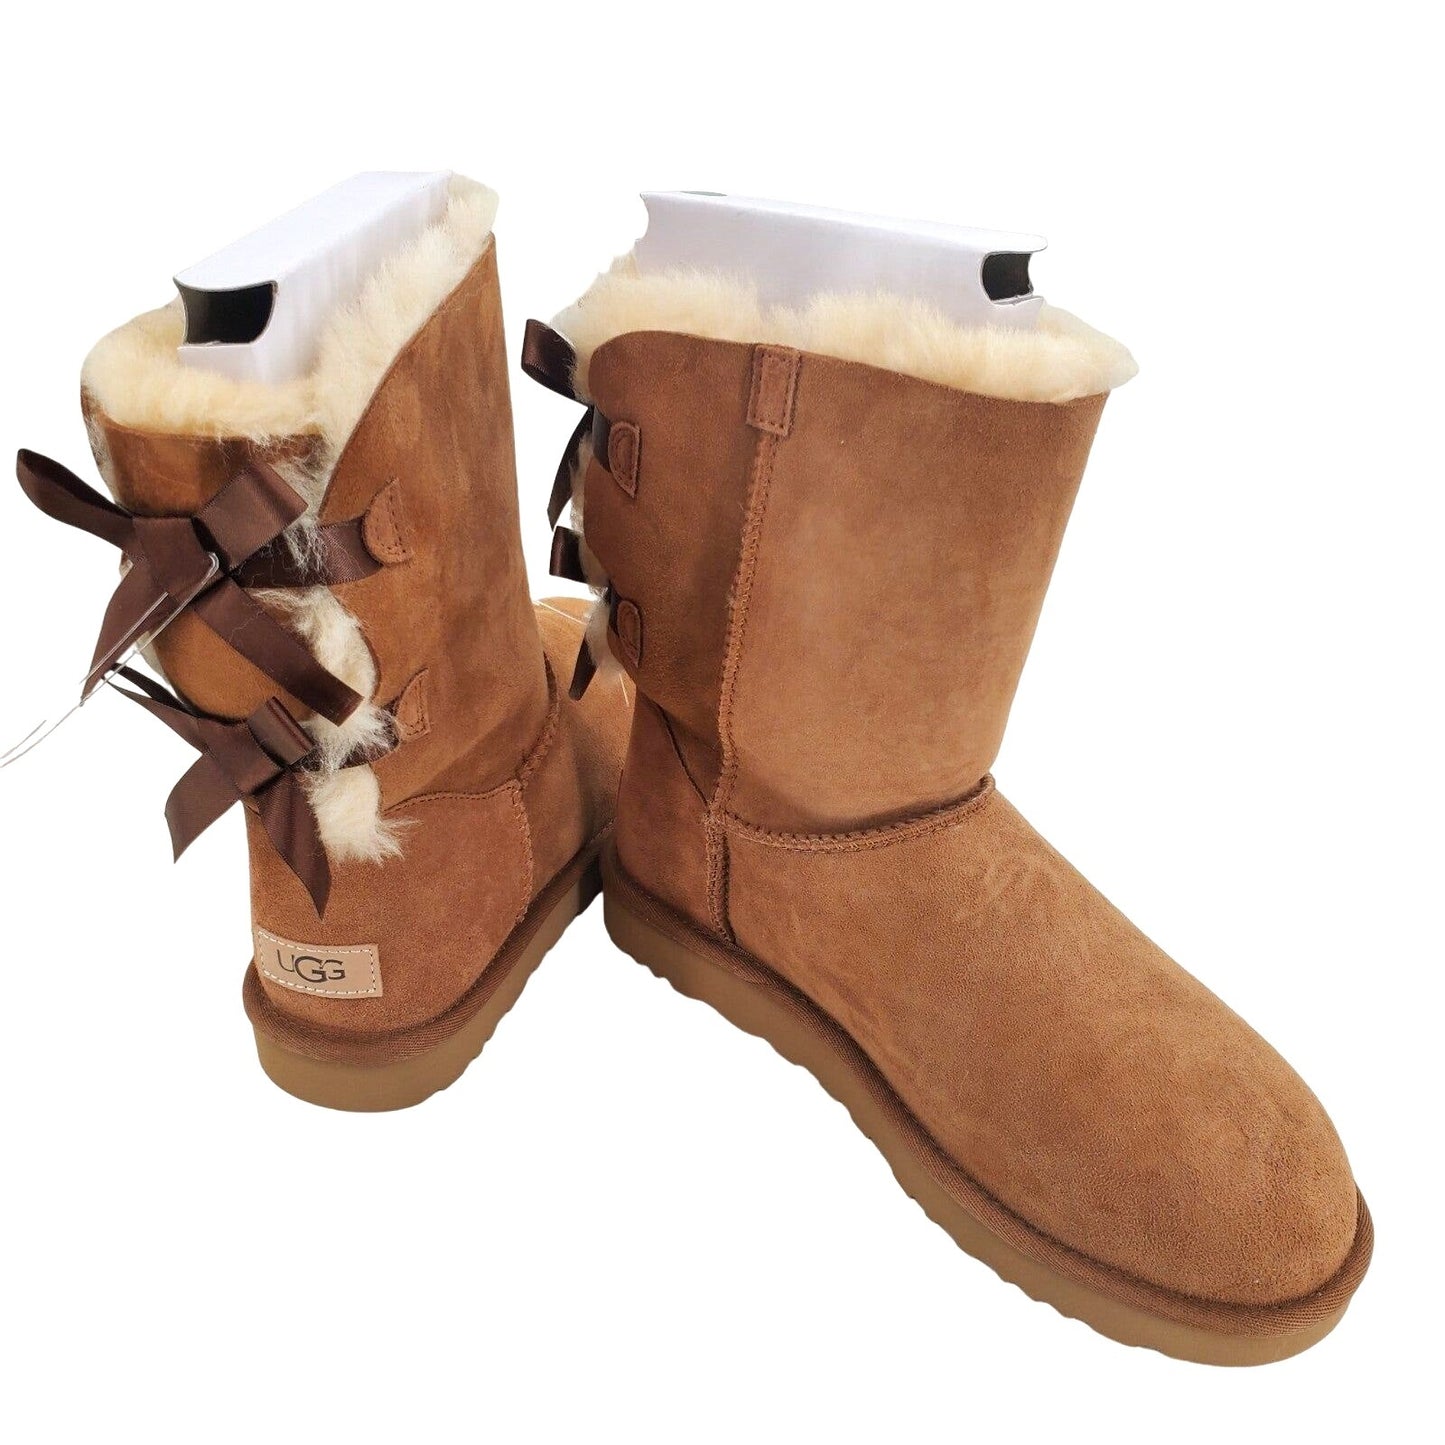 UGG Boots Woman's BAILEY BOW II Chestnut Fur Sheepskin Suede Winter Shoes Snow